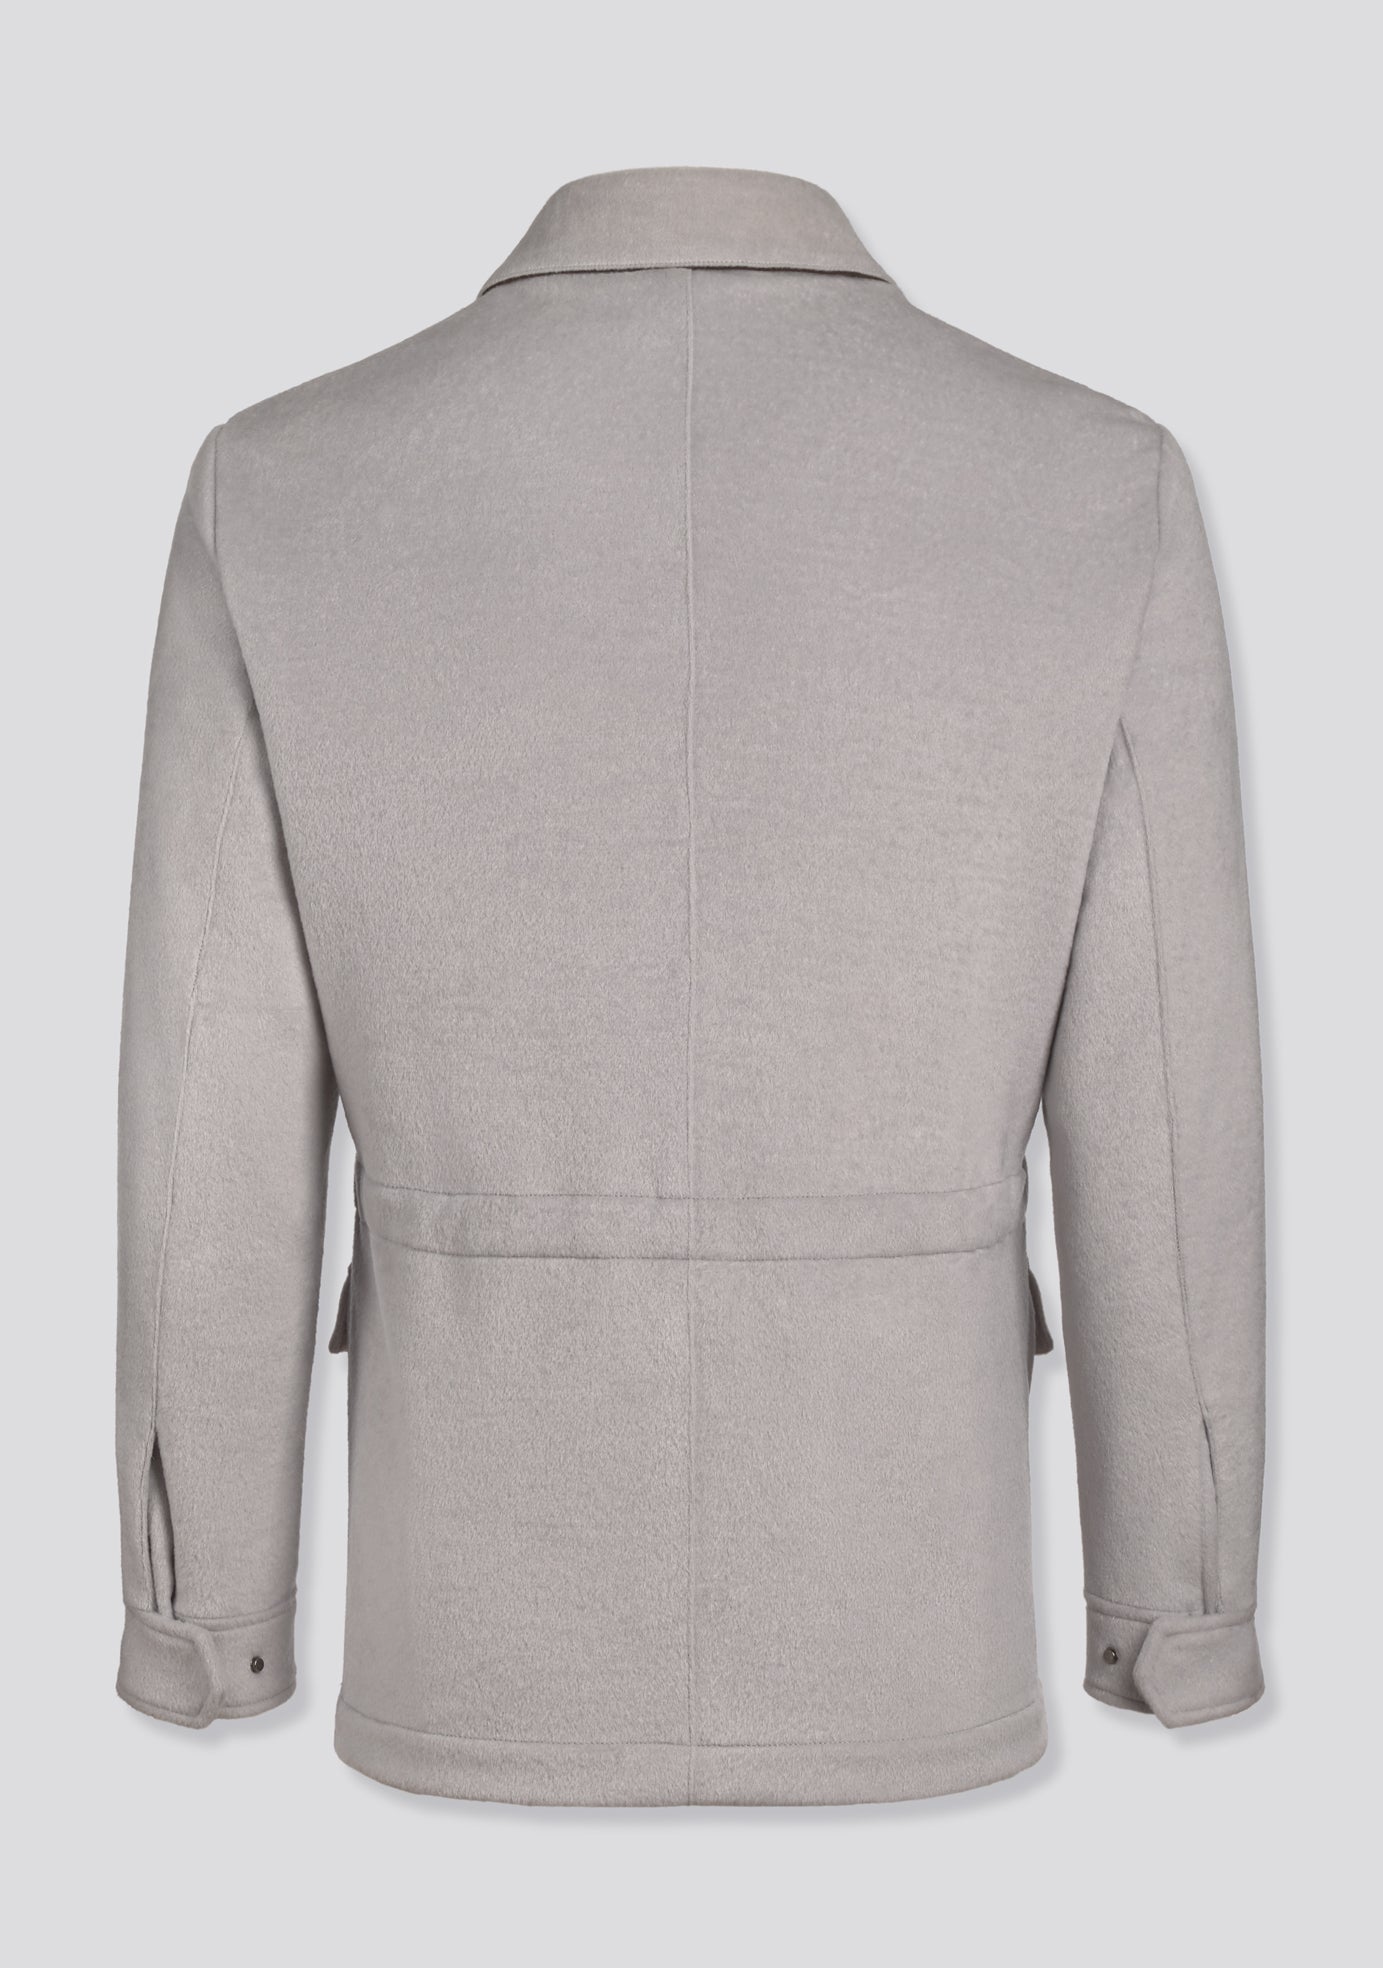 Ash Grey Blended Wool Winter Jacket Kired Collaboration